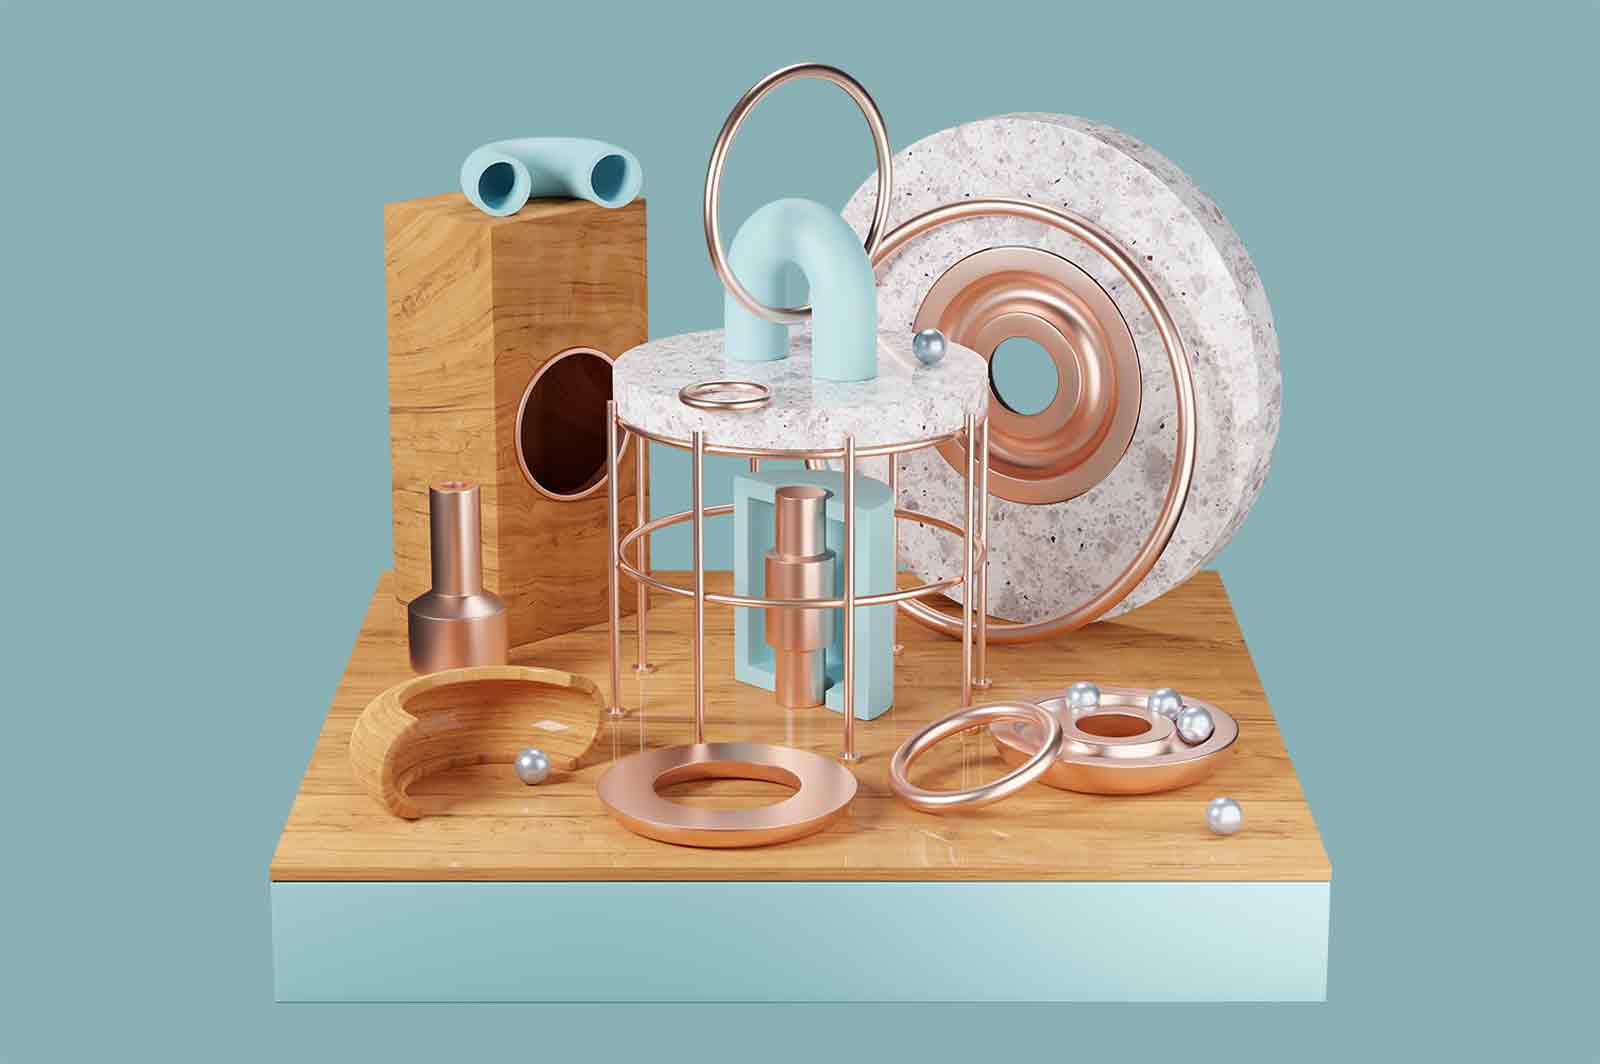 Abstract composition of details on wooden stand 3d rendered illustration. Ceramic, metal, wooden and plastic components of single mechanism concept